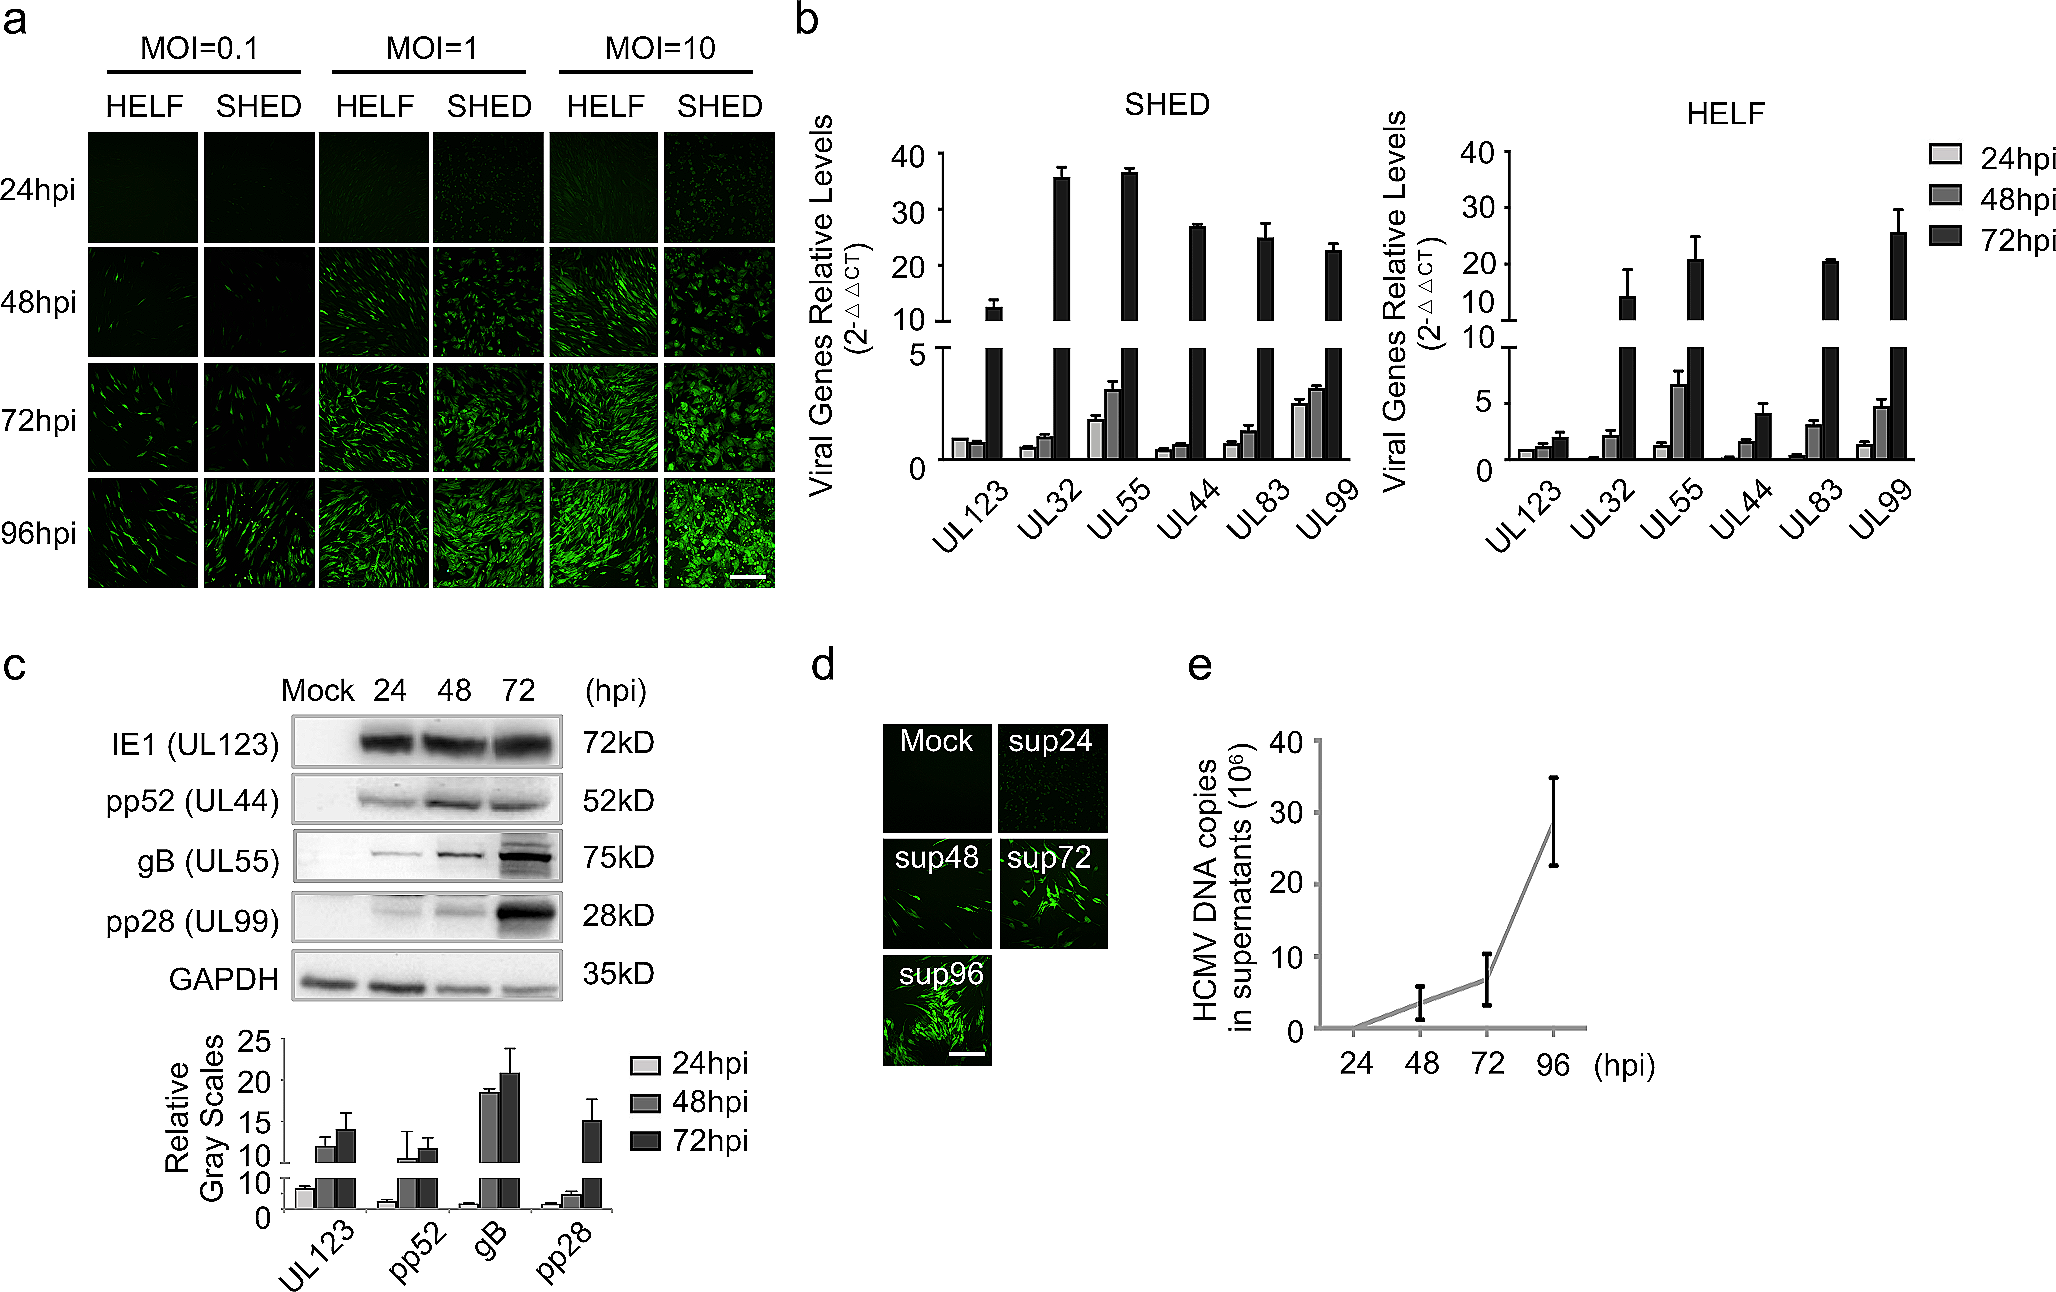 Human cytomegalovirus infection impairs neural differentiation via repressing sterol regulatory element binding protein 2-mediated cholesterol biosynthesis